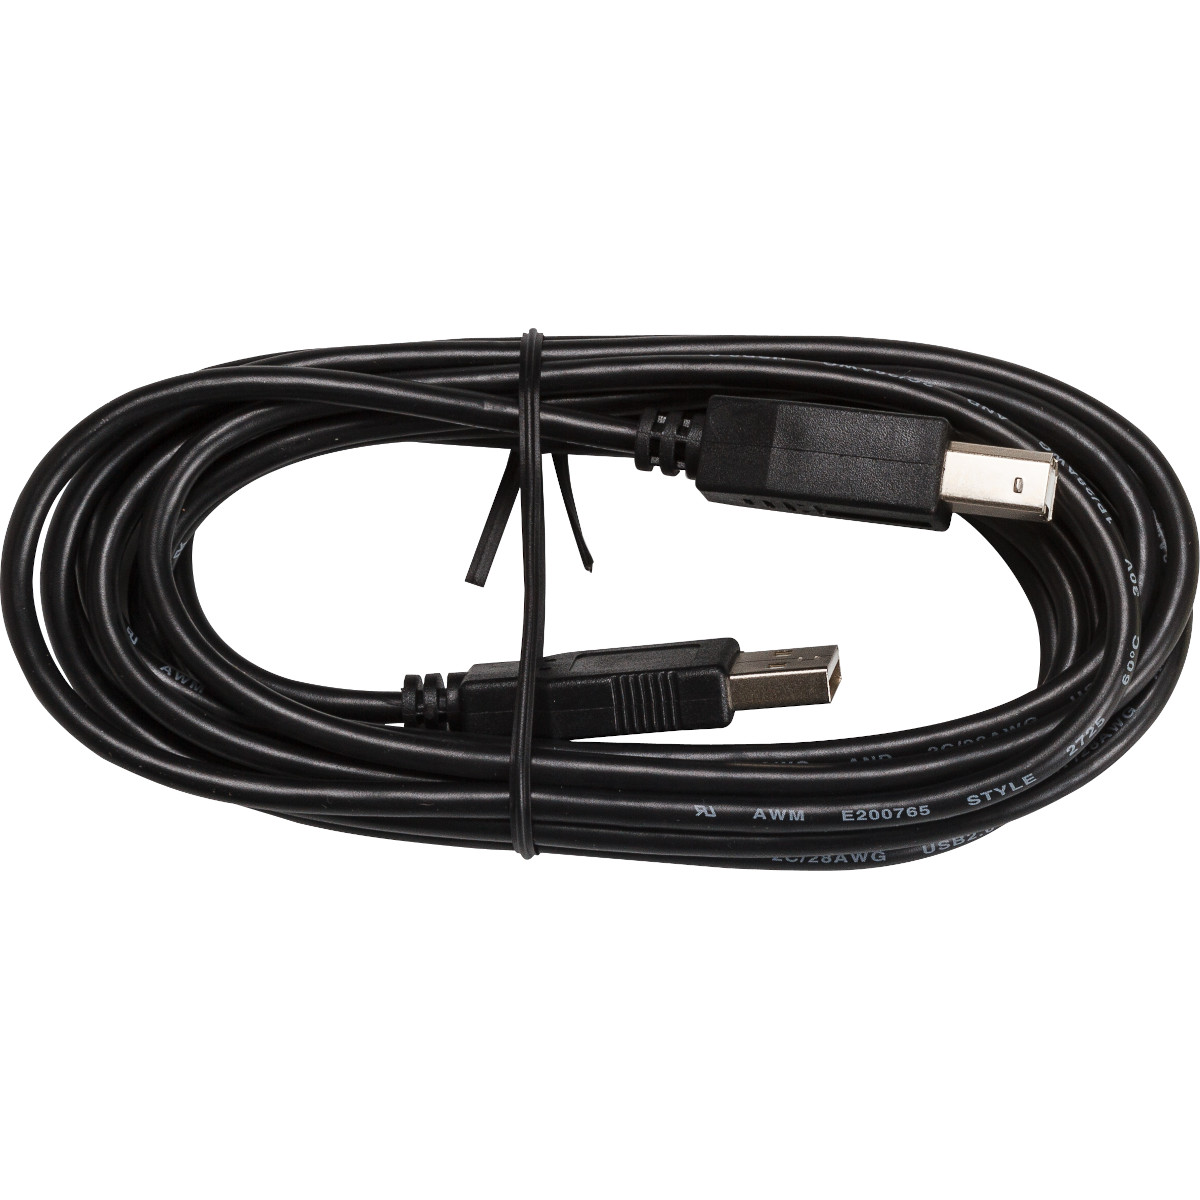 CABLE USB2.0 A MALE-B MALE 10FT